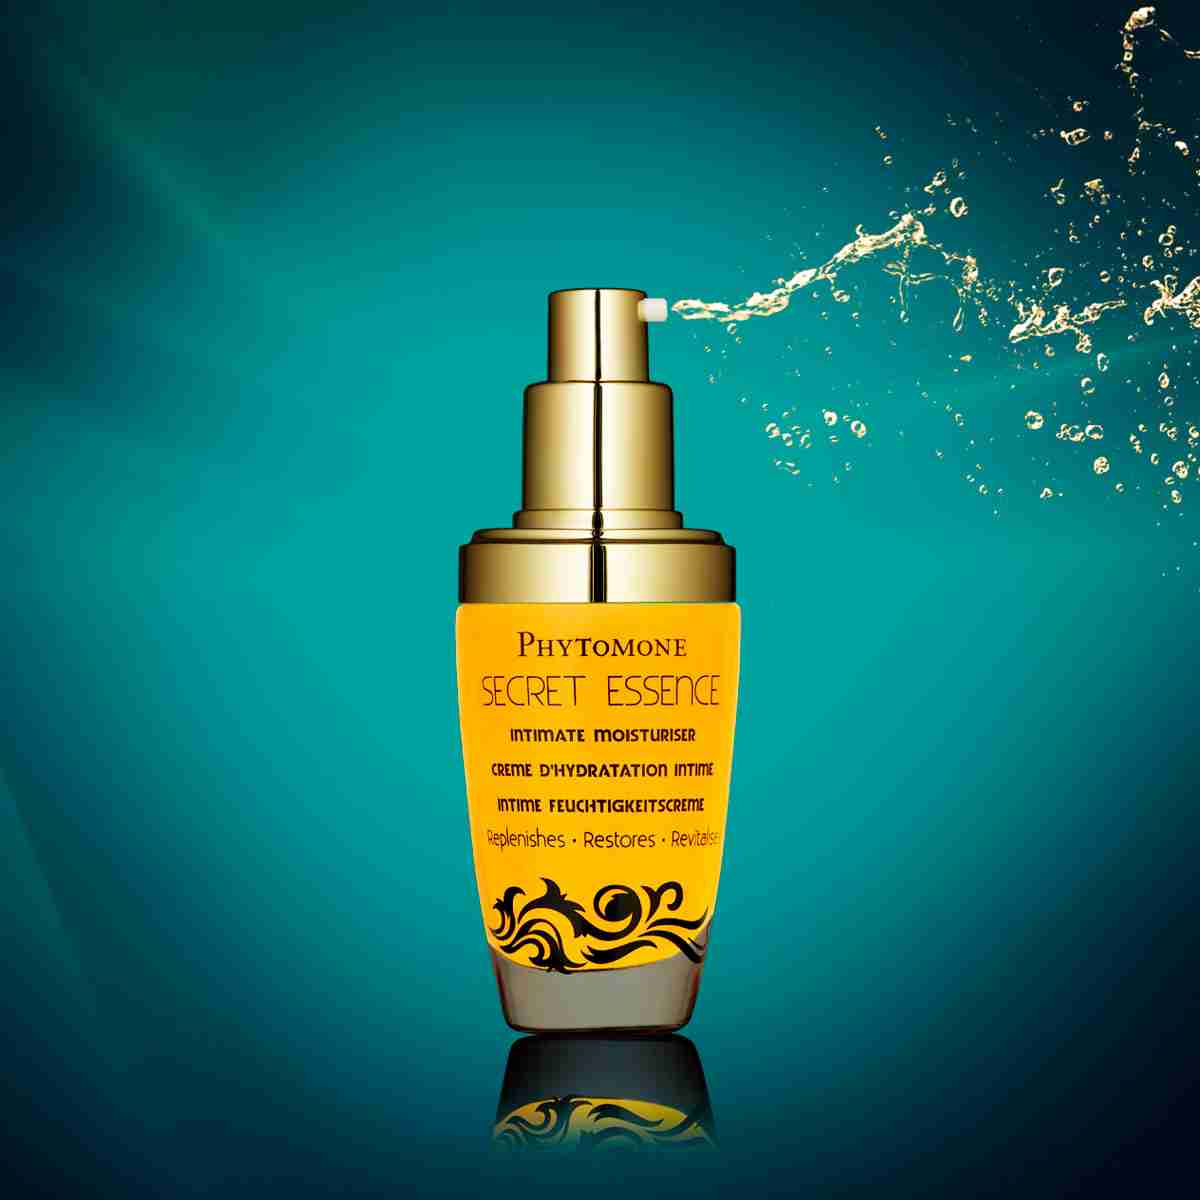 Sleepless Nights Calming Face Oil For mature Skin